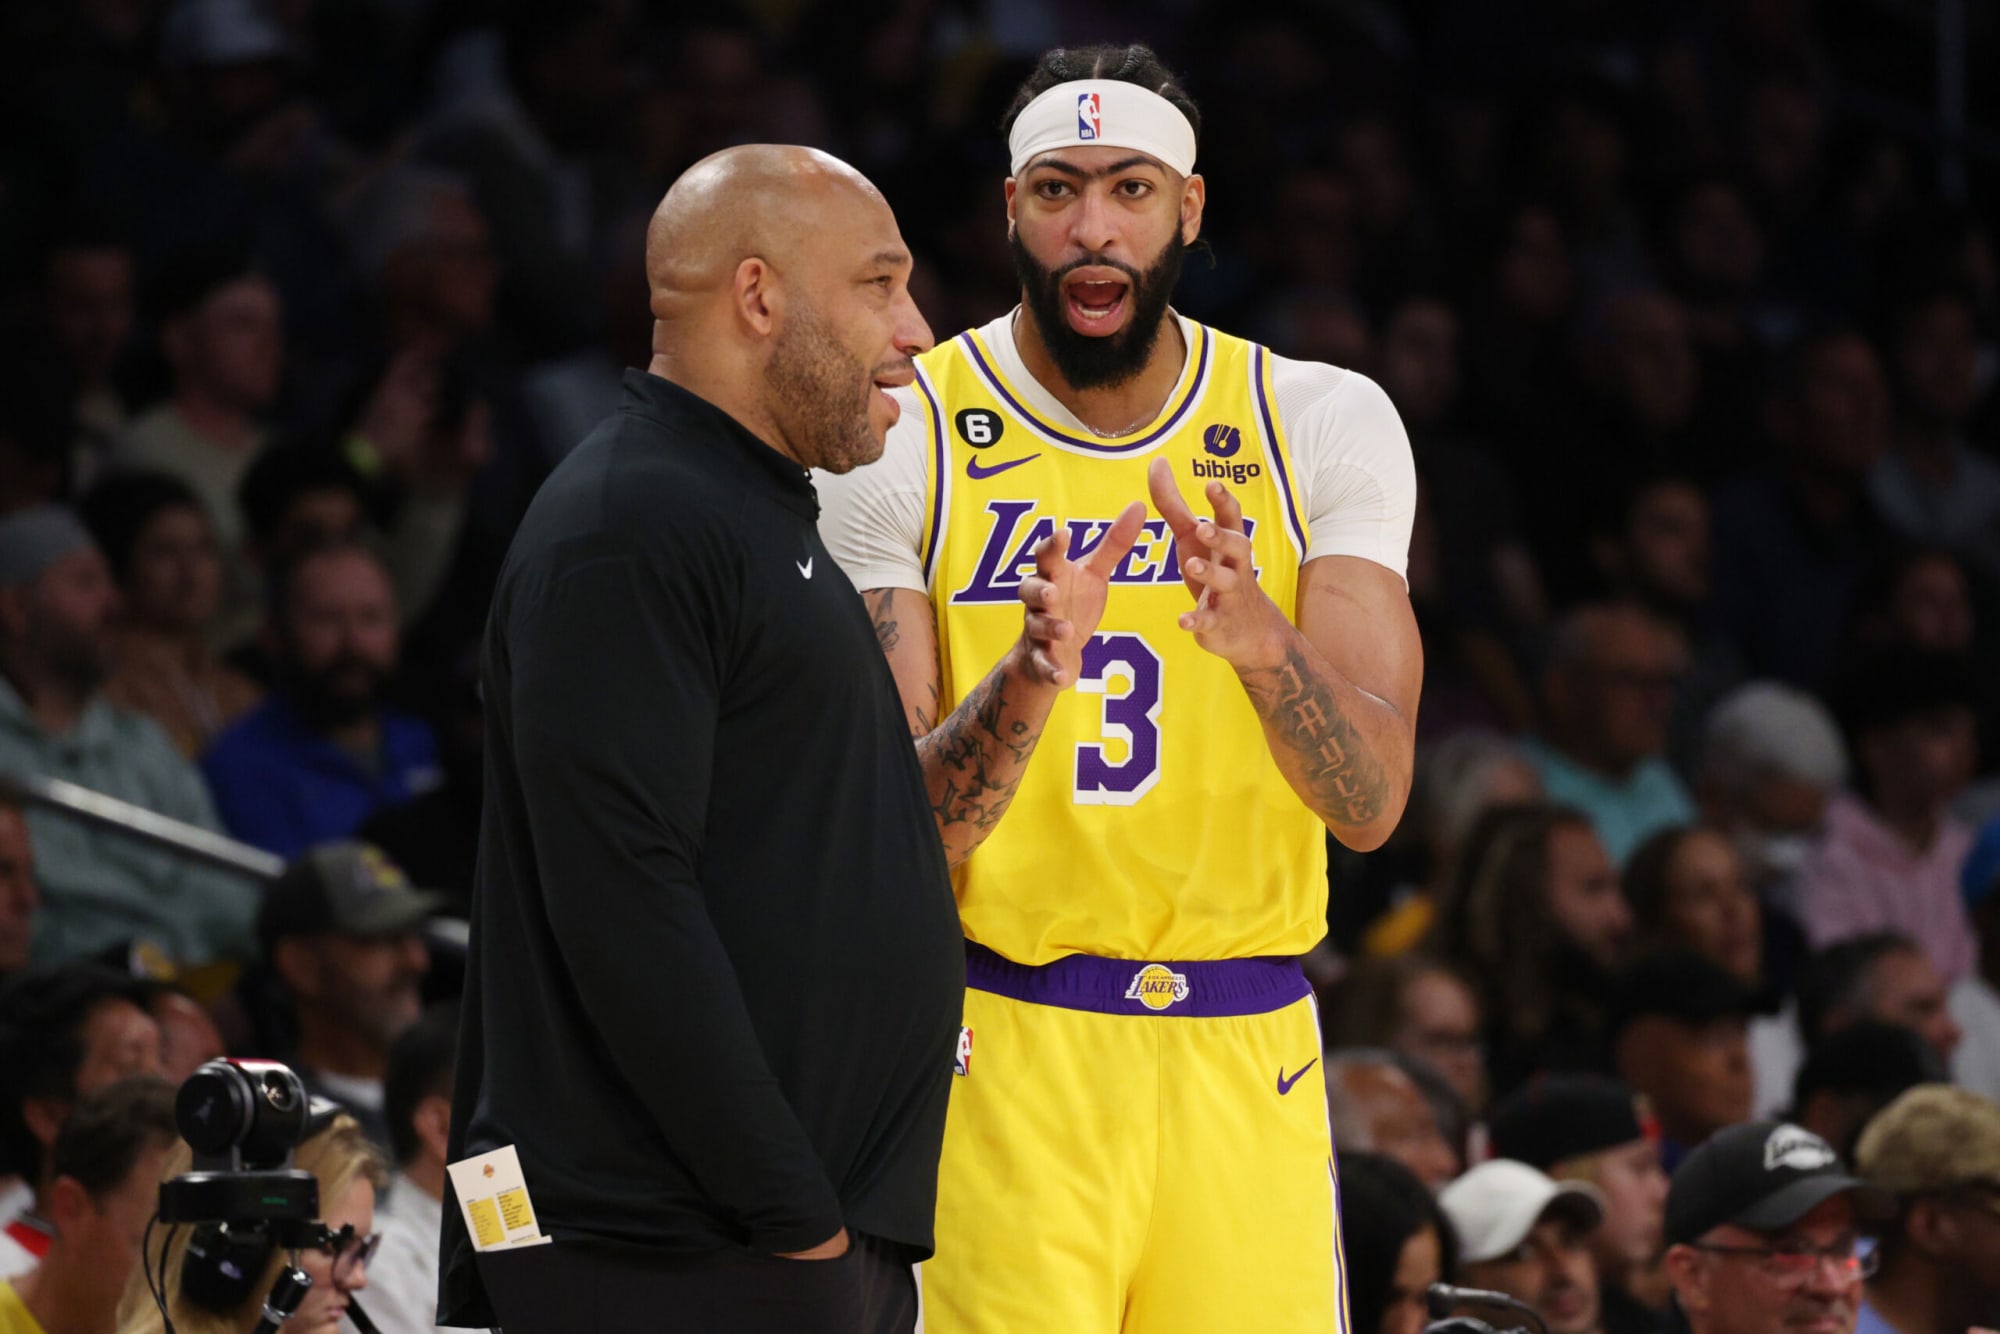 NBA Rumors: The Lakers will target this top free agent center this summer